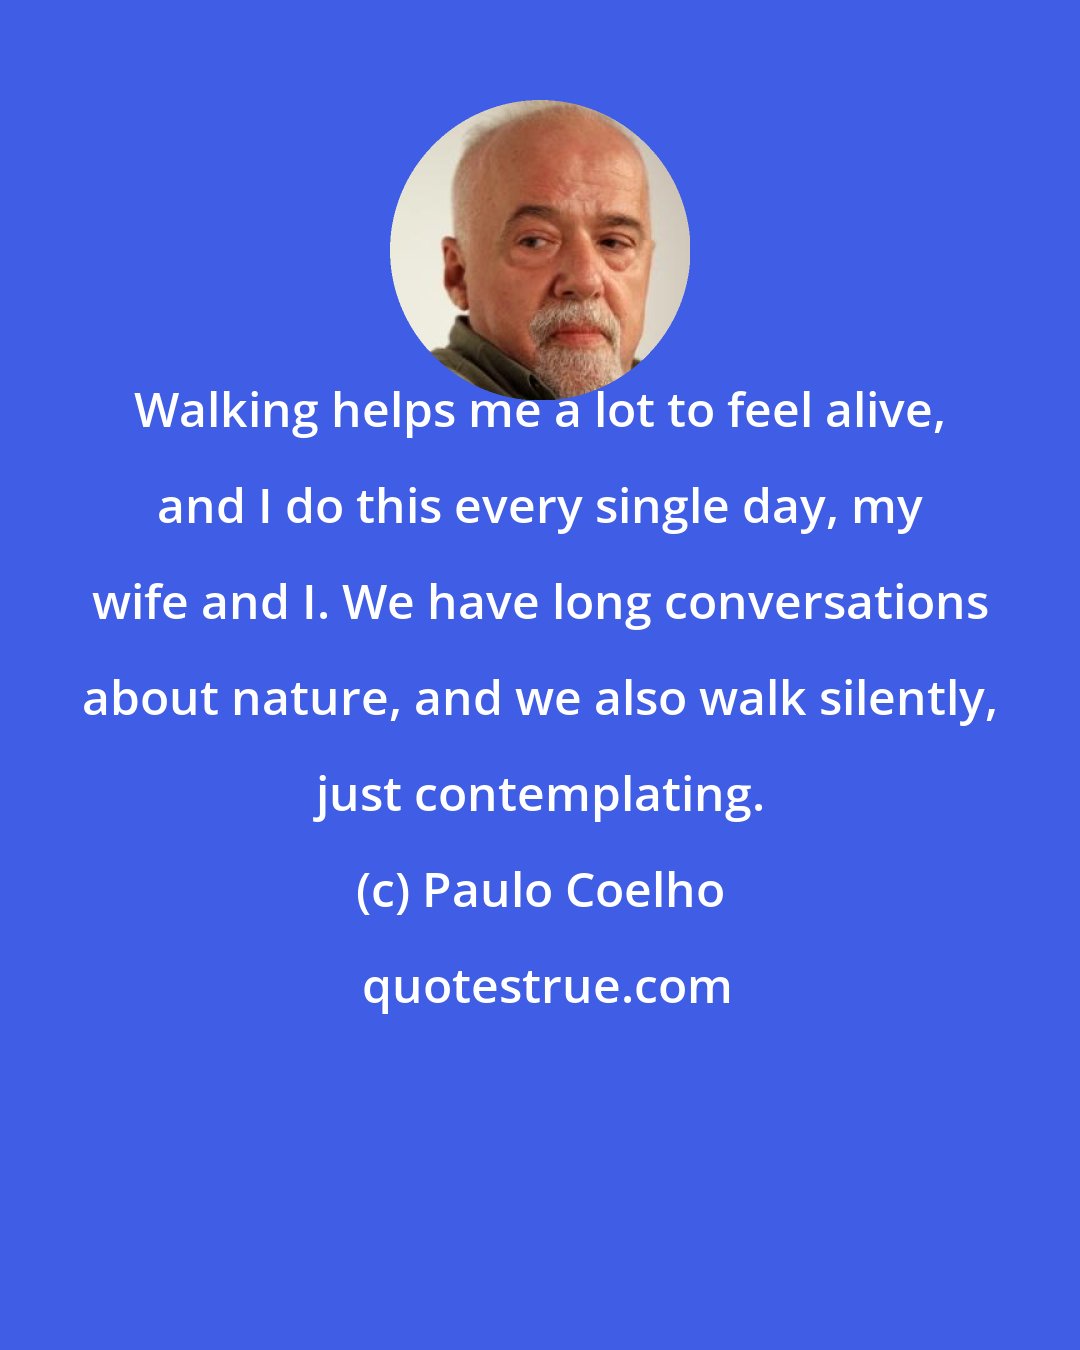 Paulo Coelho: Walking helps me a lot to feel alive, and I do this every single day, my wife and I. We have long conversations about nature, and we also walk silently, just contemplating.